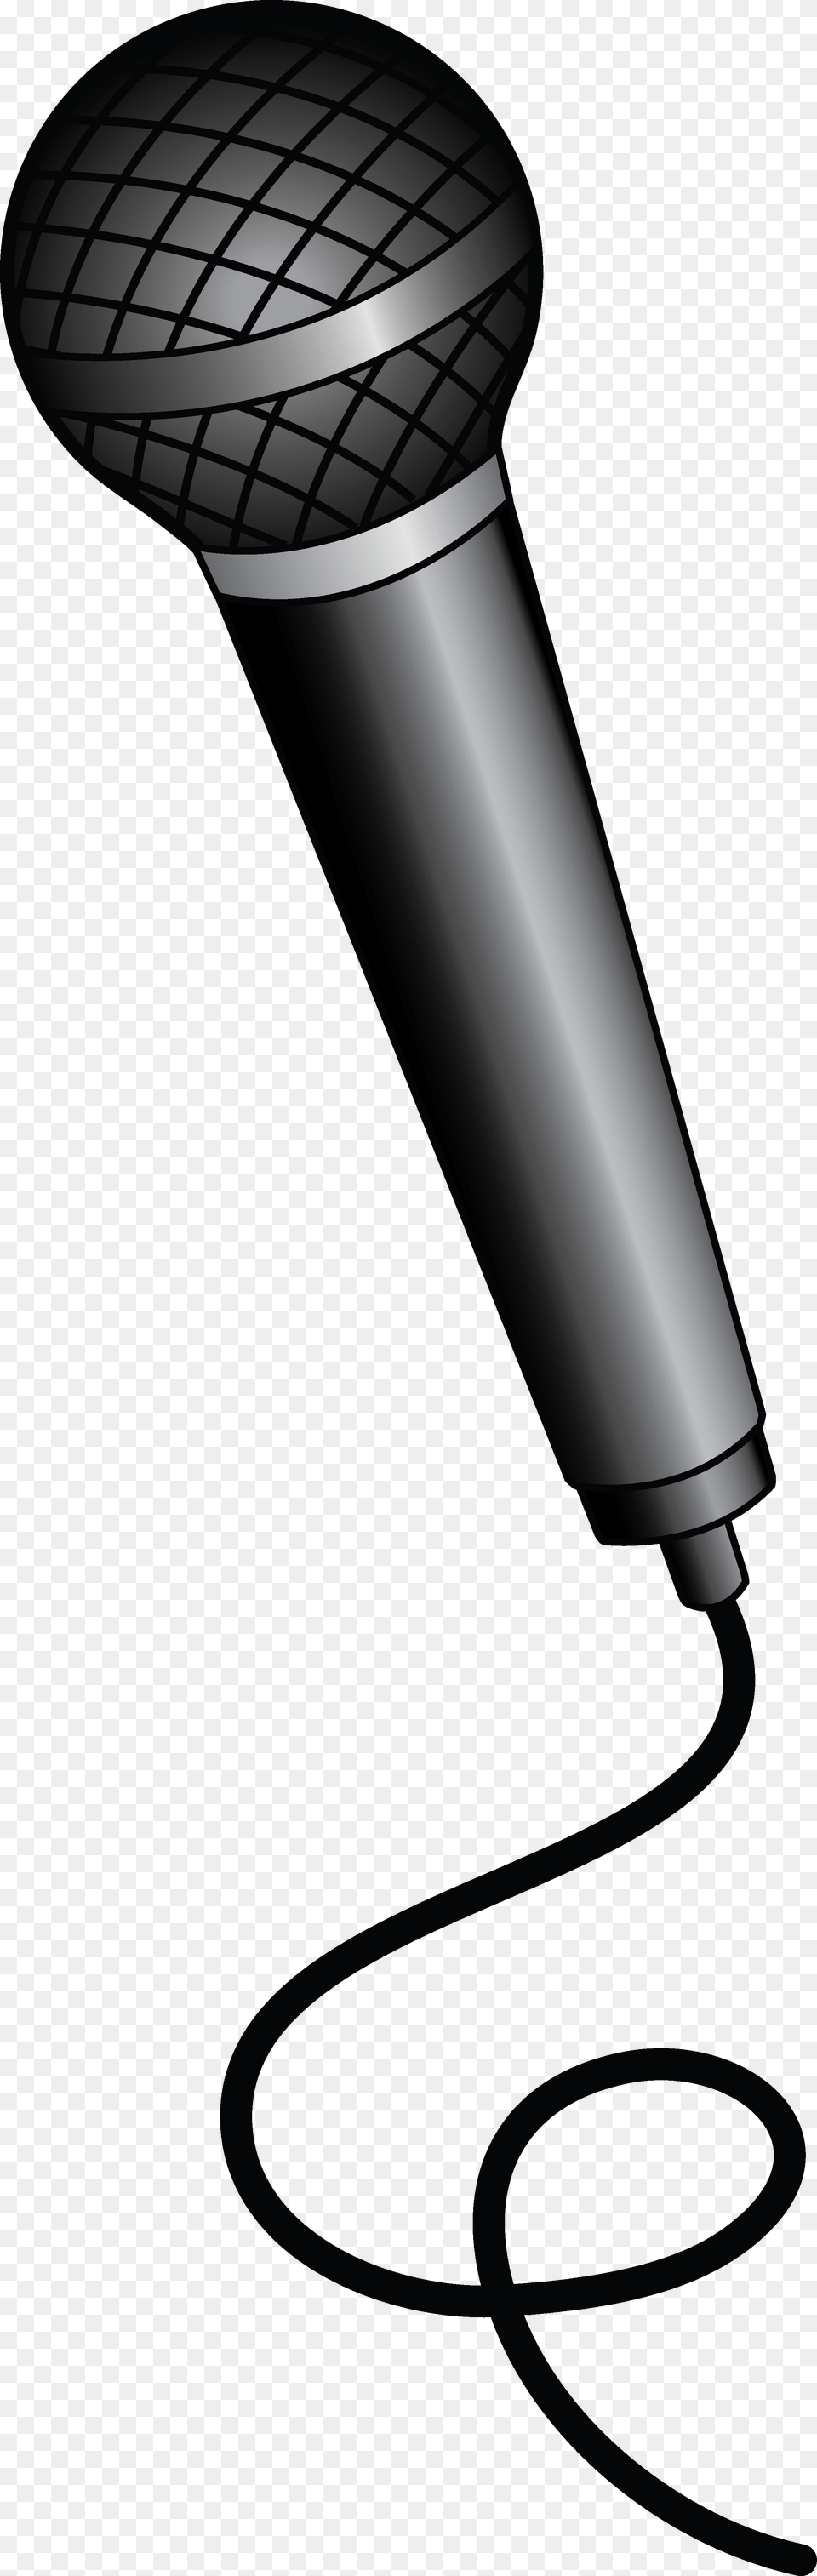 Microphone Clip Art, Electrical Device, Bottle, Shaker Free Transparent Png